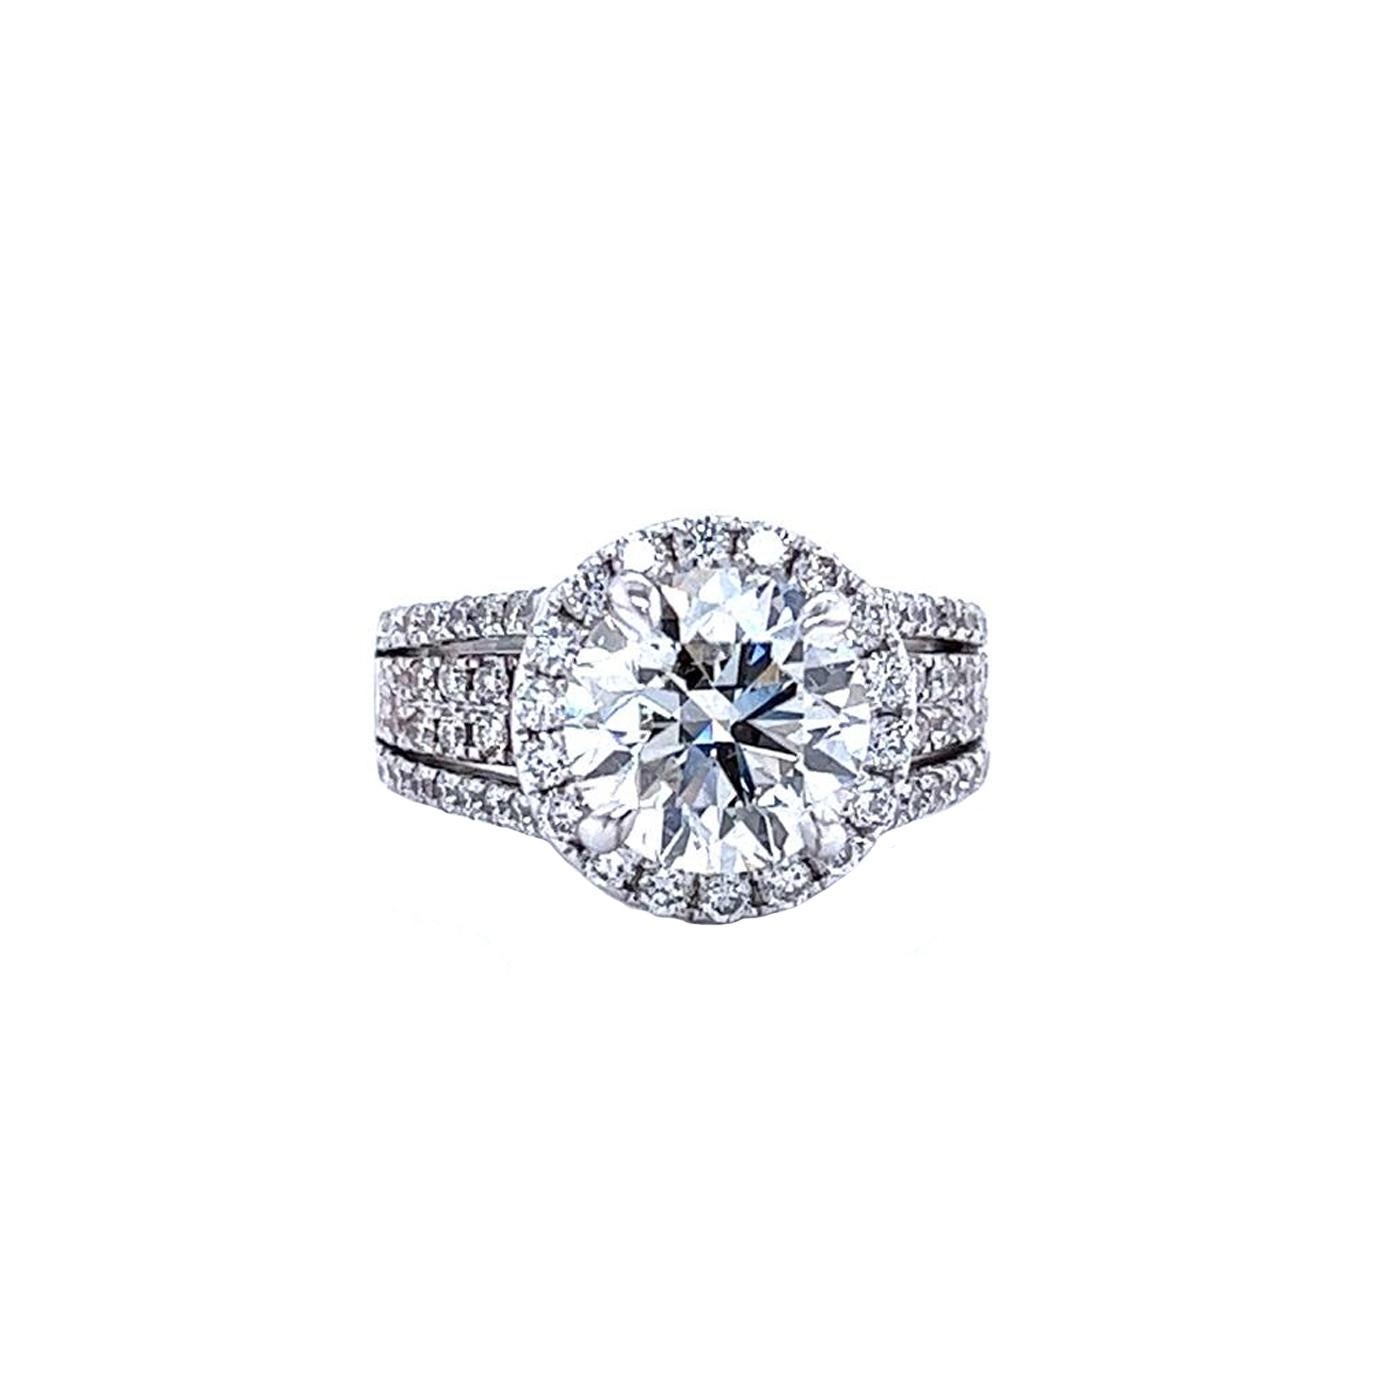 Always be on her mind when you purchase this Unique Diamond Ring. This exquisite certified ring features a delicate center Diamond that is surrounded by 2 Rows of Pave Diamonds. This intricately designed ring will really look amazing on your